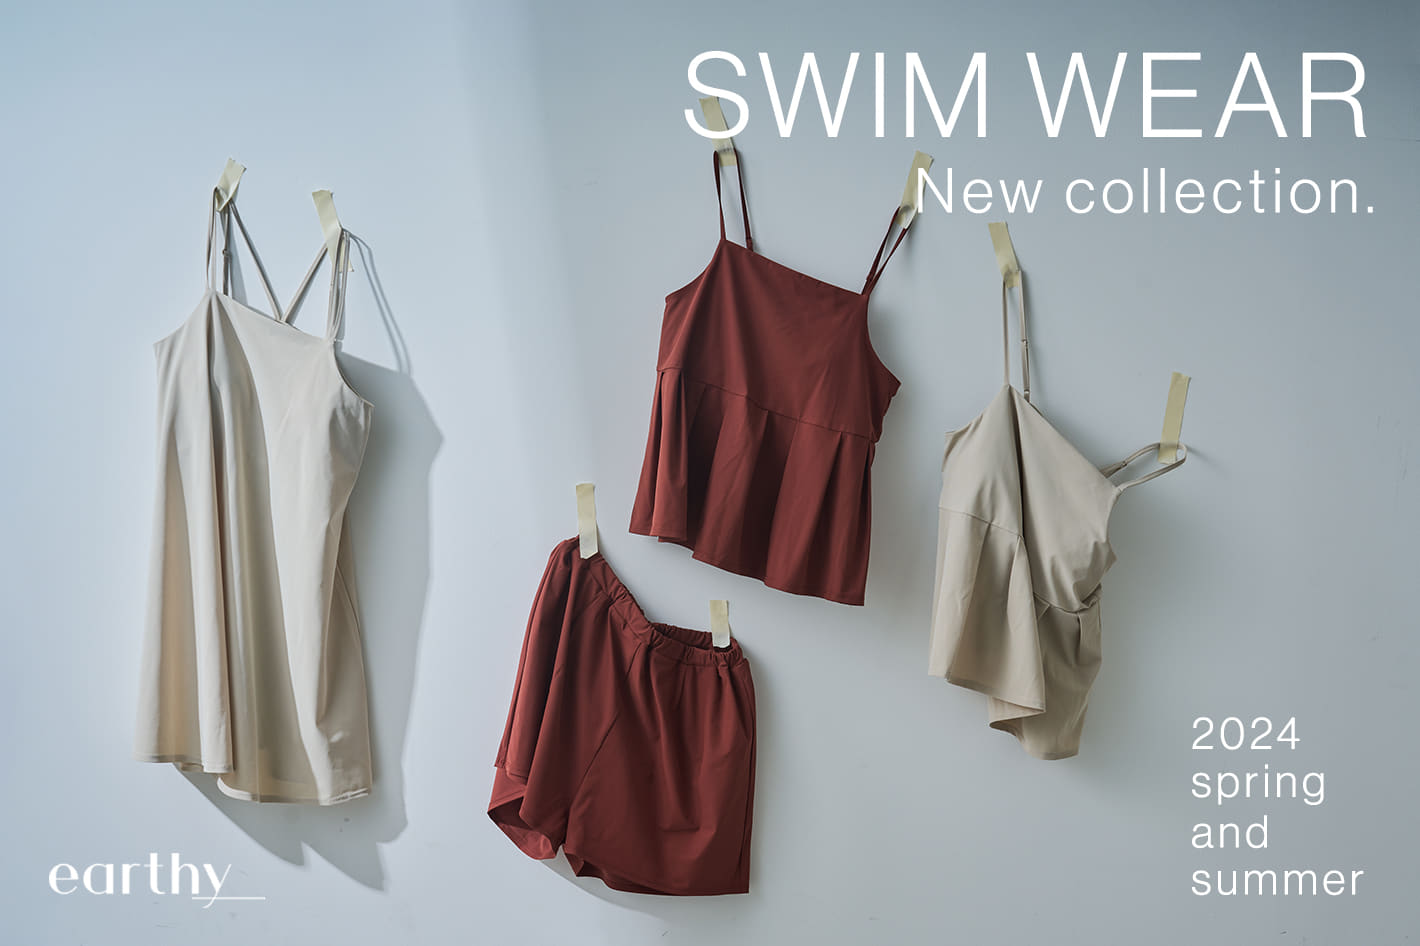 earthy_ SWIM WEAR NEW COLLECTION.   2024 spring and summer.